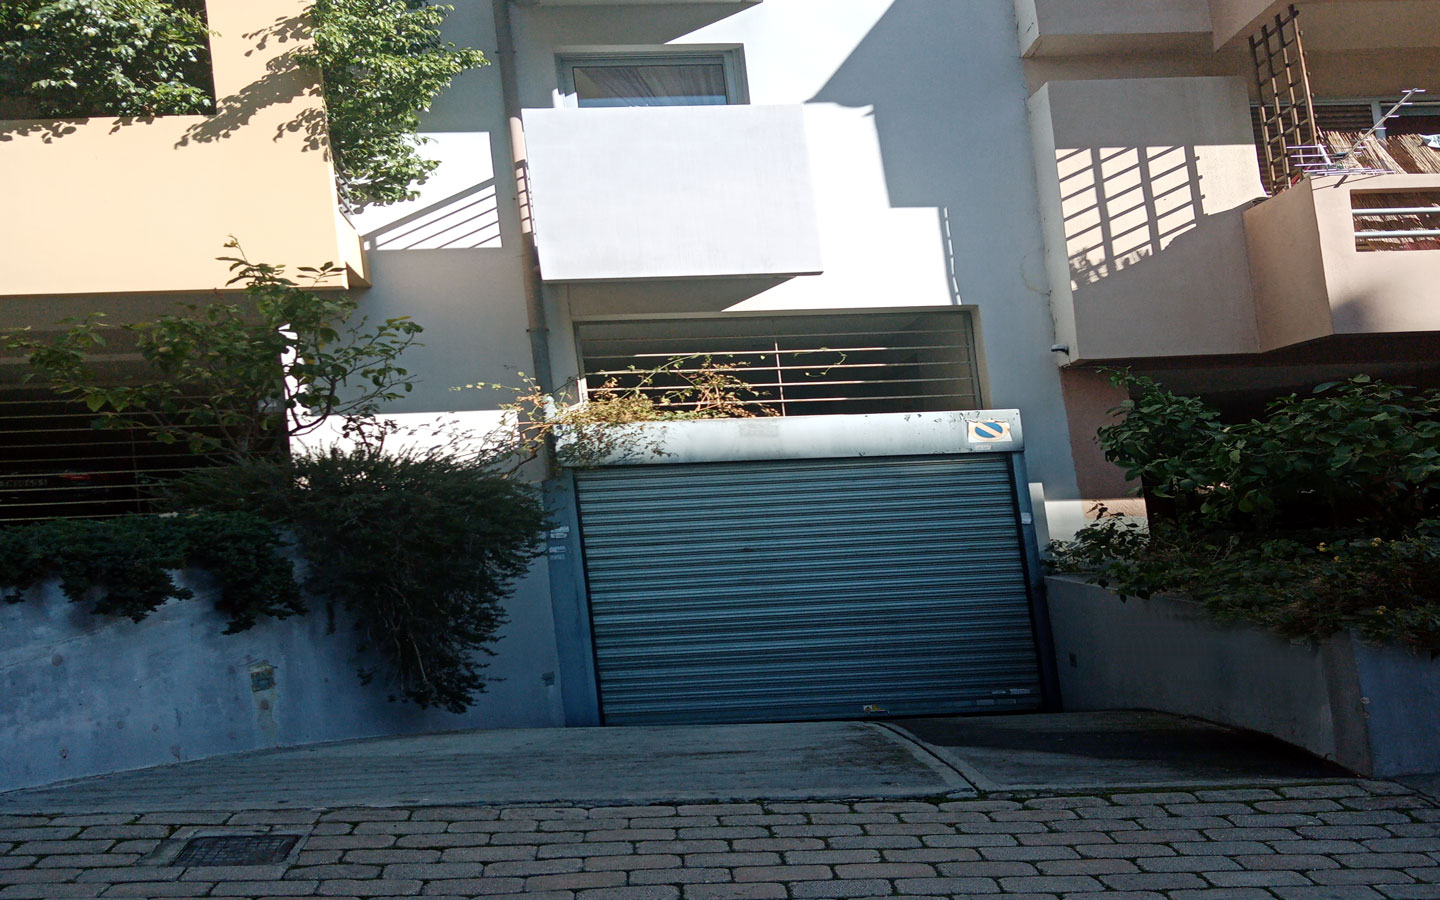 38 Entrance of the apartment building and of parking area